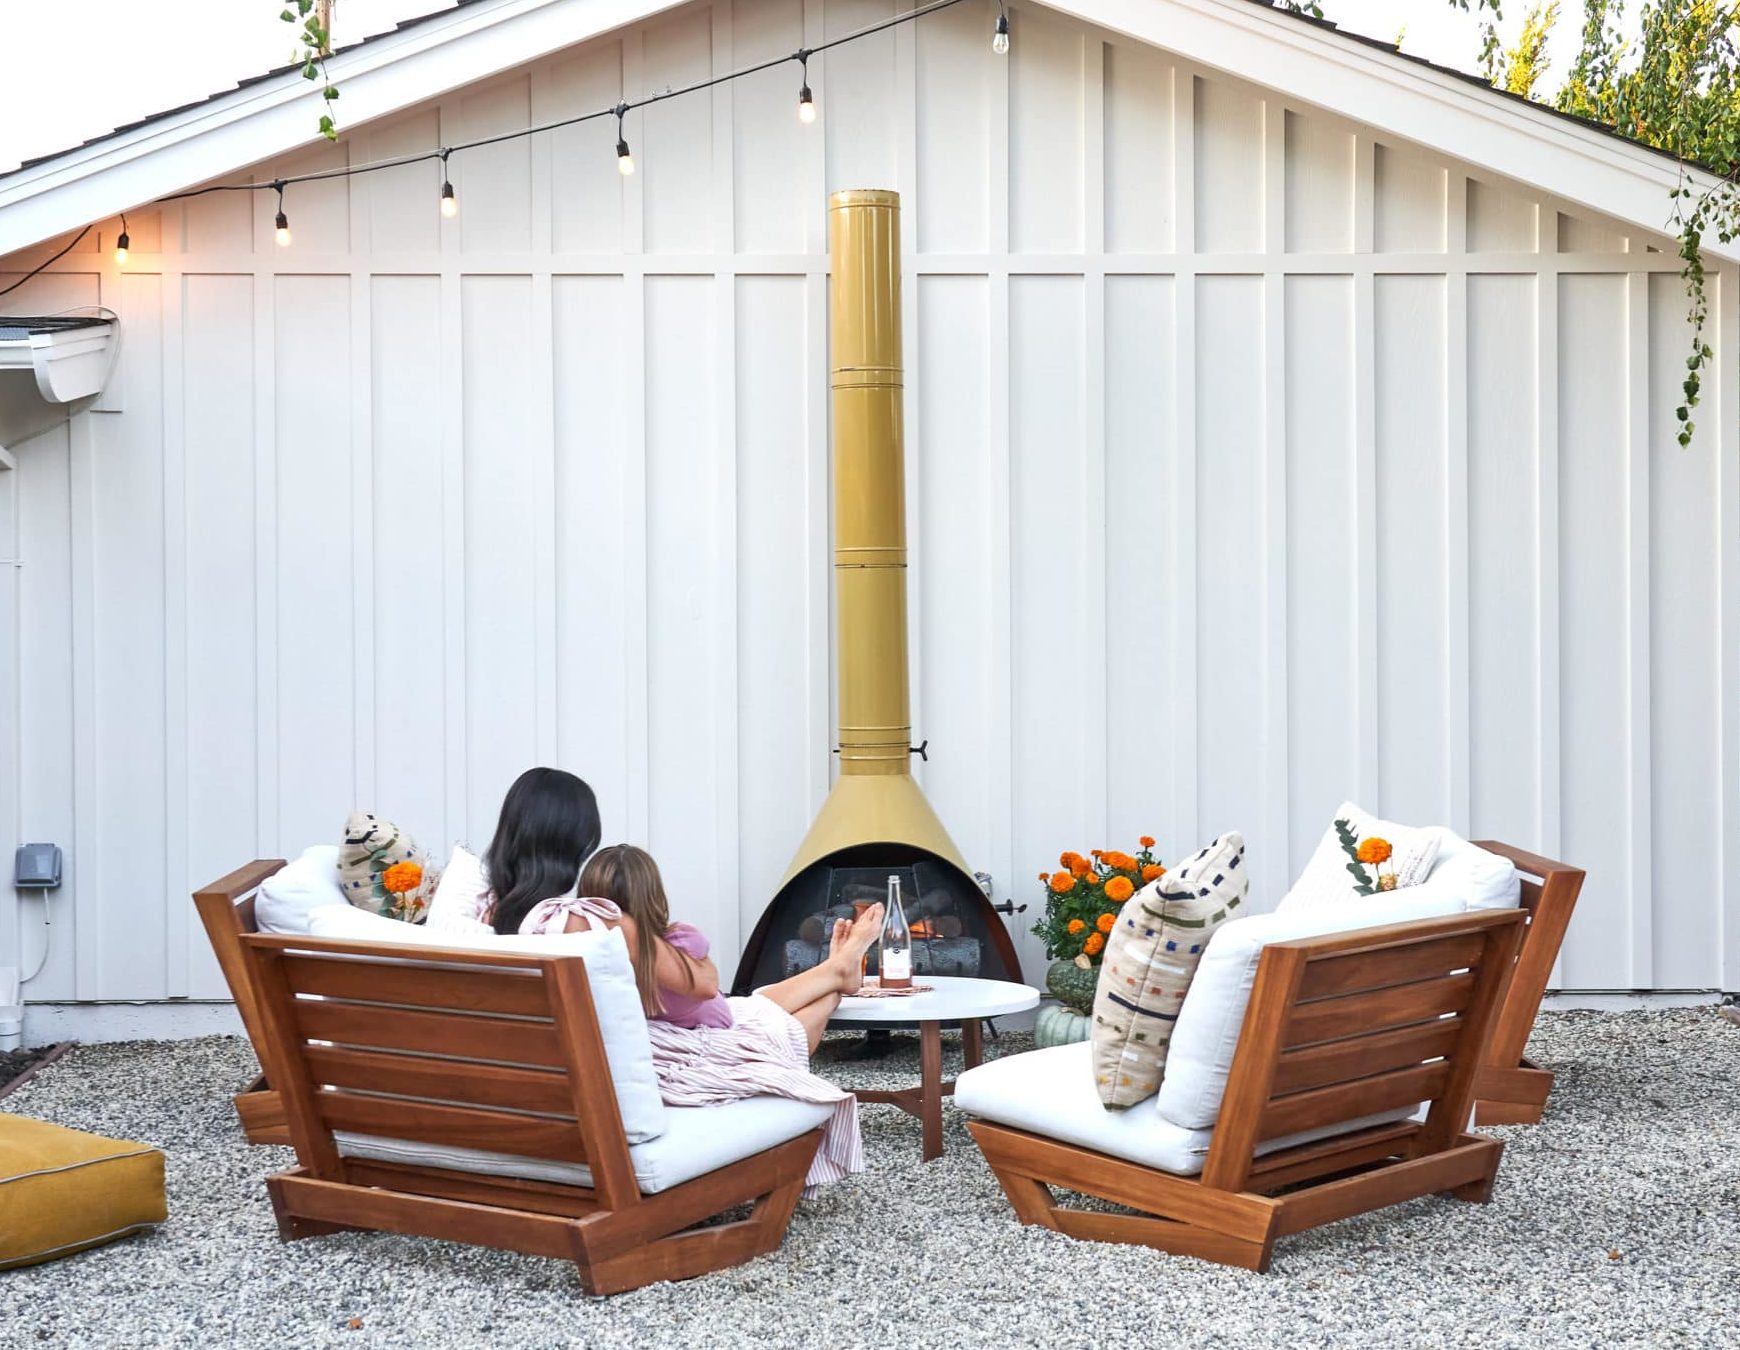 Mother and daughter sitting in outdoor lounge chairs in front of vintage chimenea